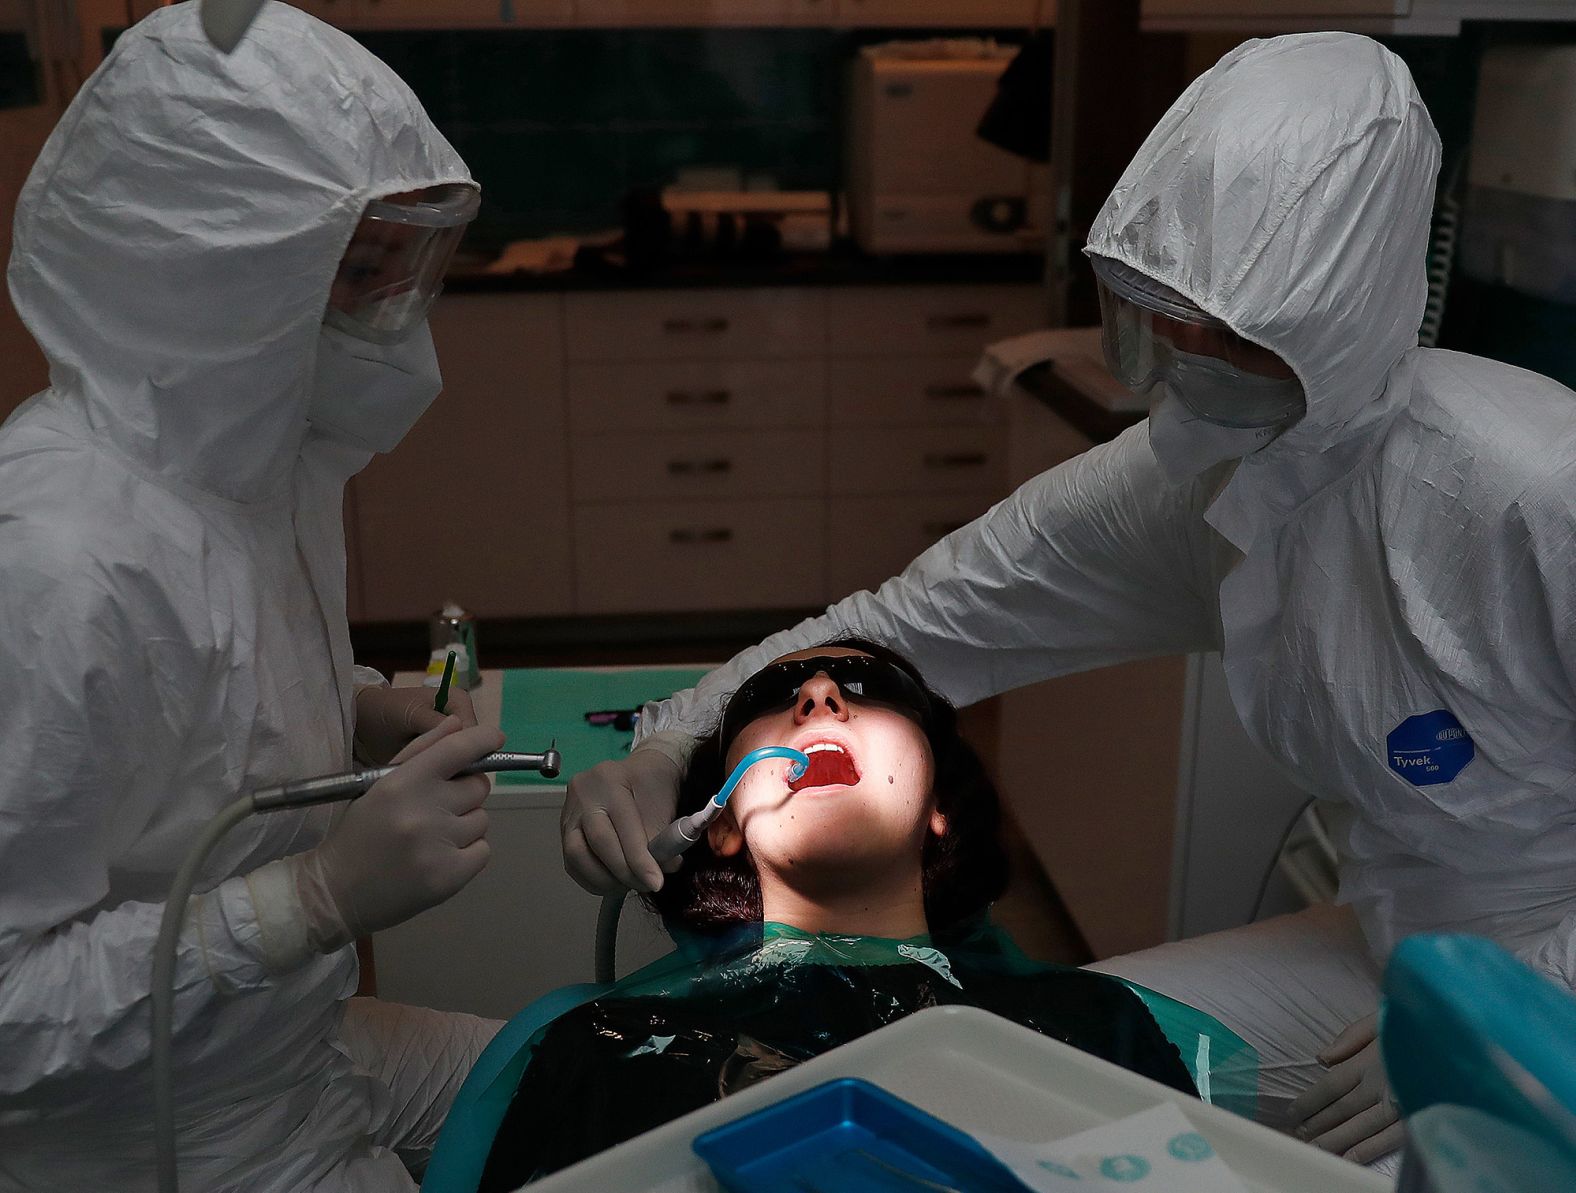 Dentist Dora Gemesi and her assistant, Time Raksi-Csuhai, work on a patient in Budapest, Hungary, on May 18. It was the first day that dental practices reopened in the country.